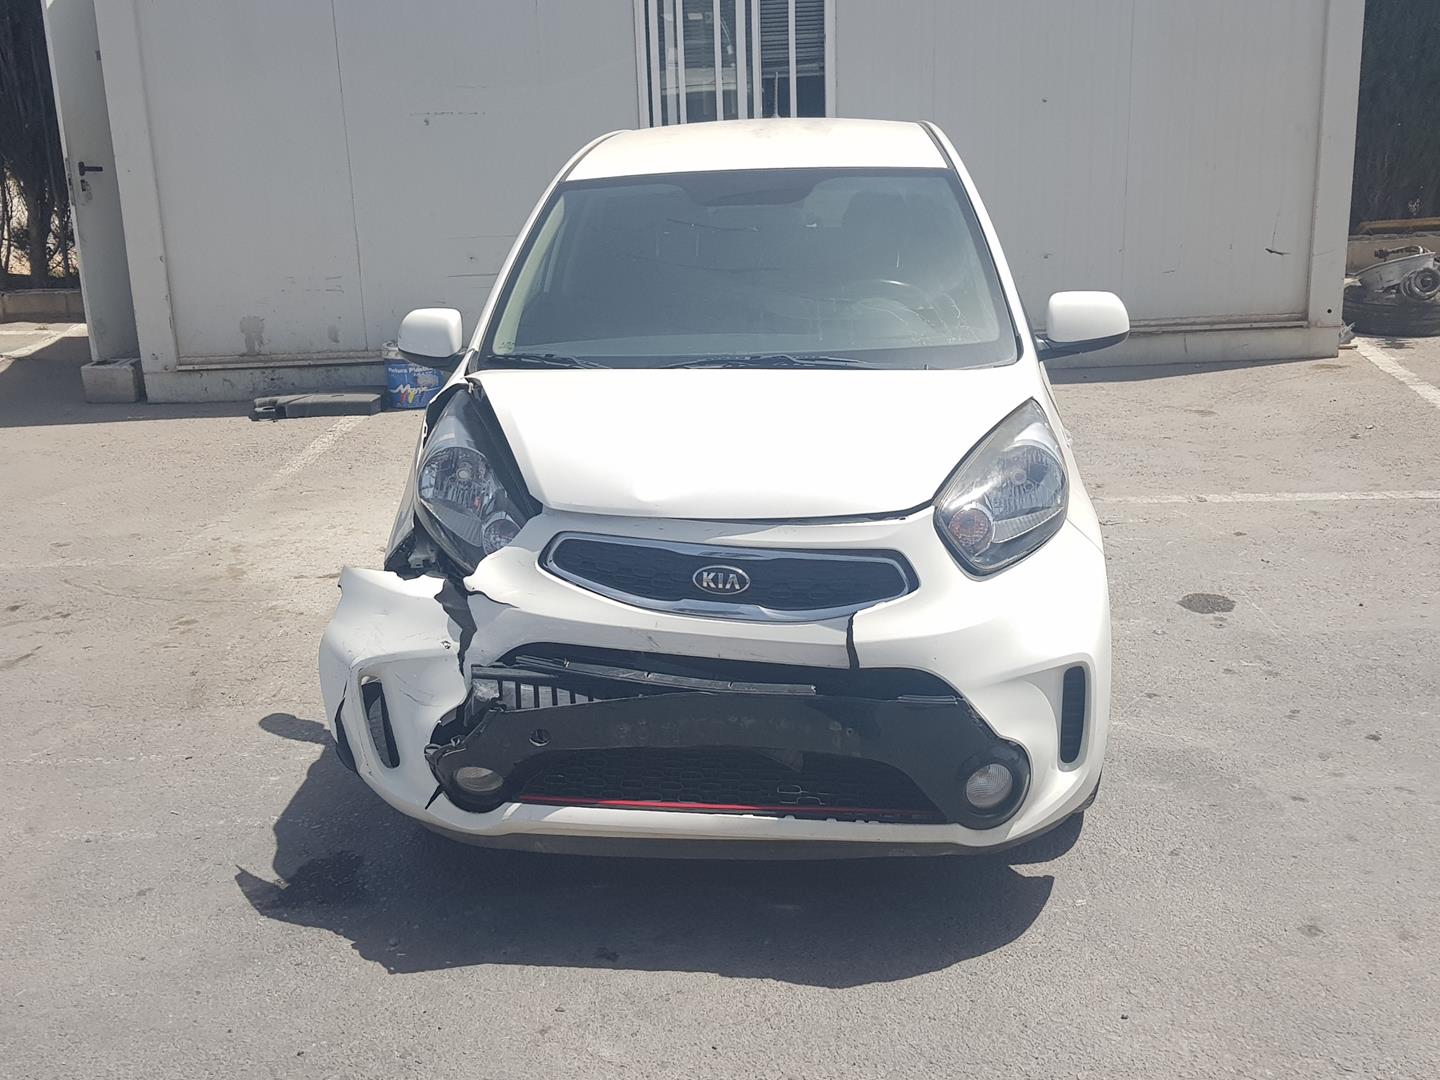 KIA Picanto 2 generation (2011-2017) Other Body Parts 351904A700 23621505